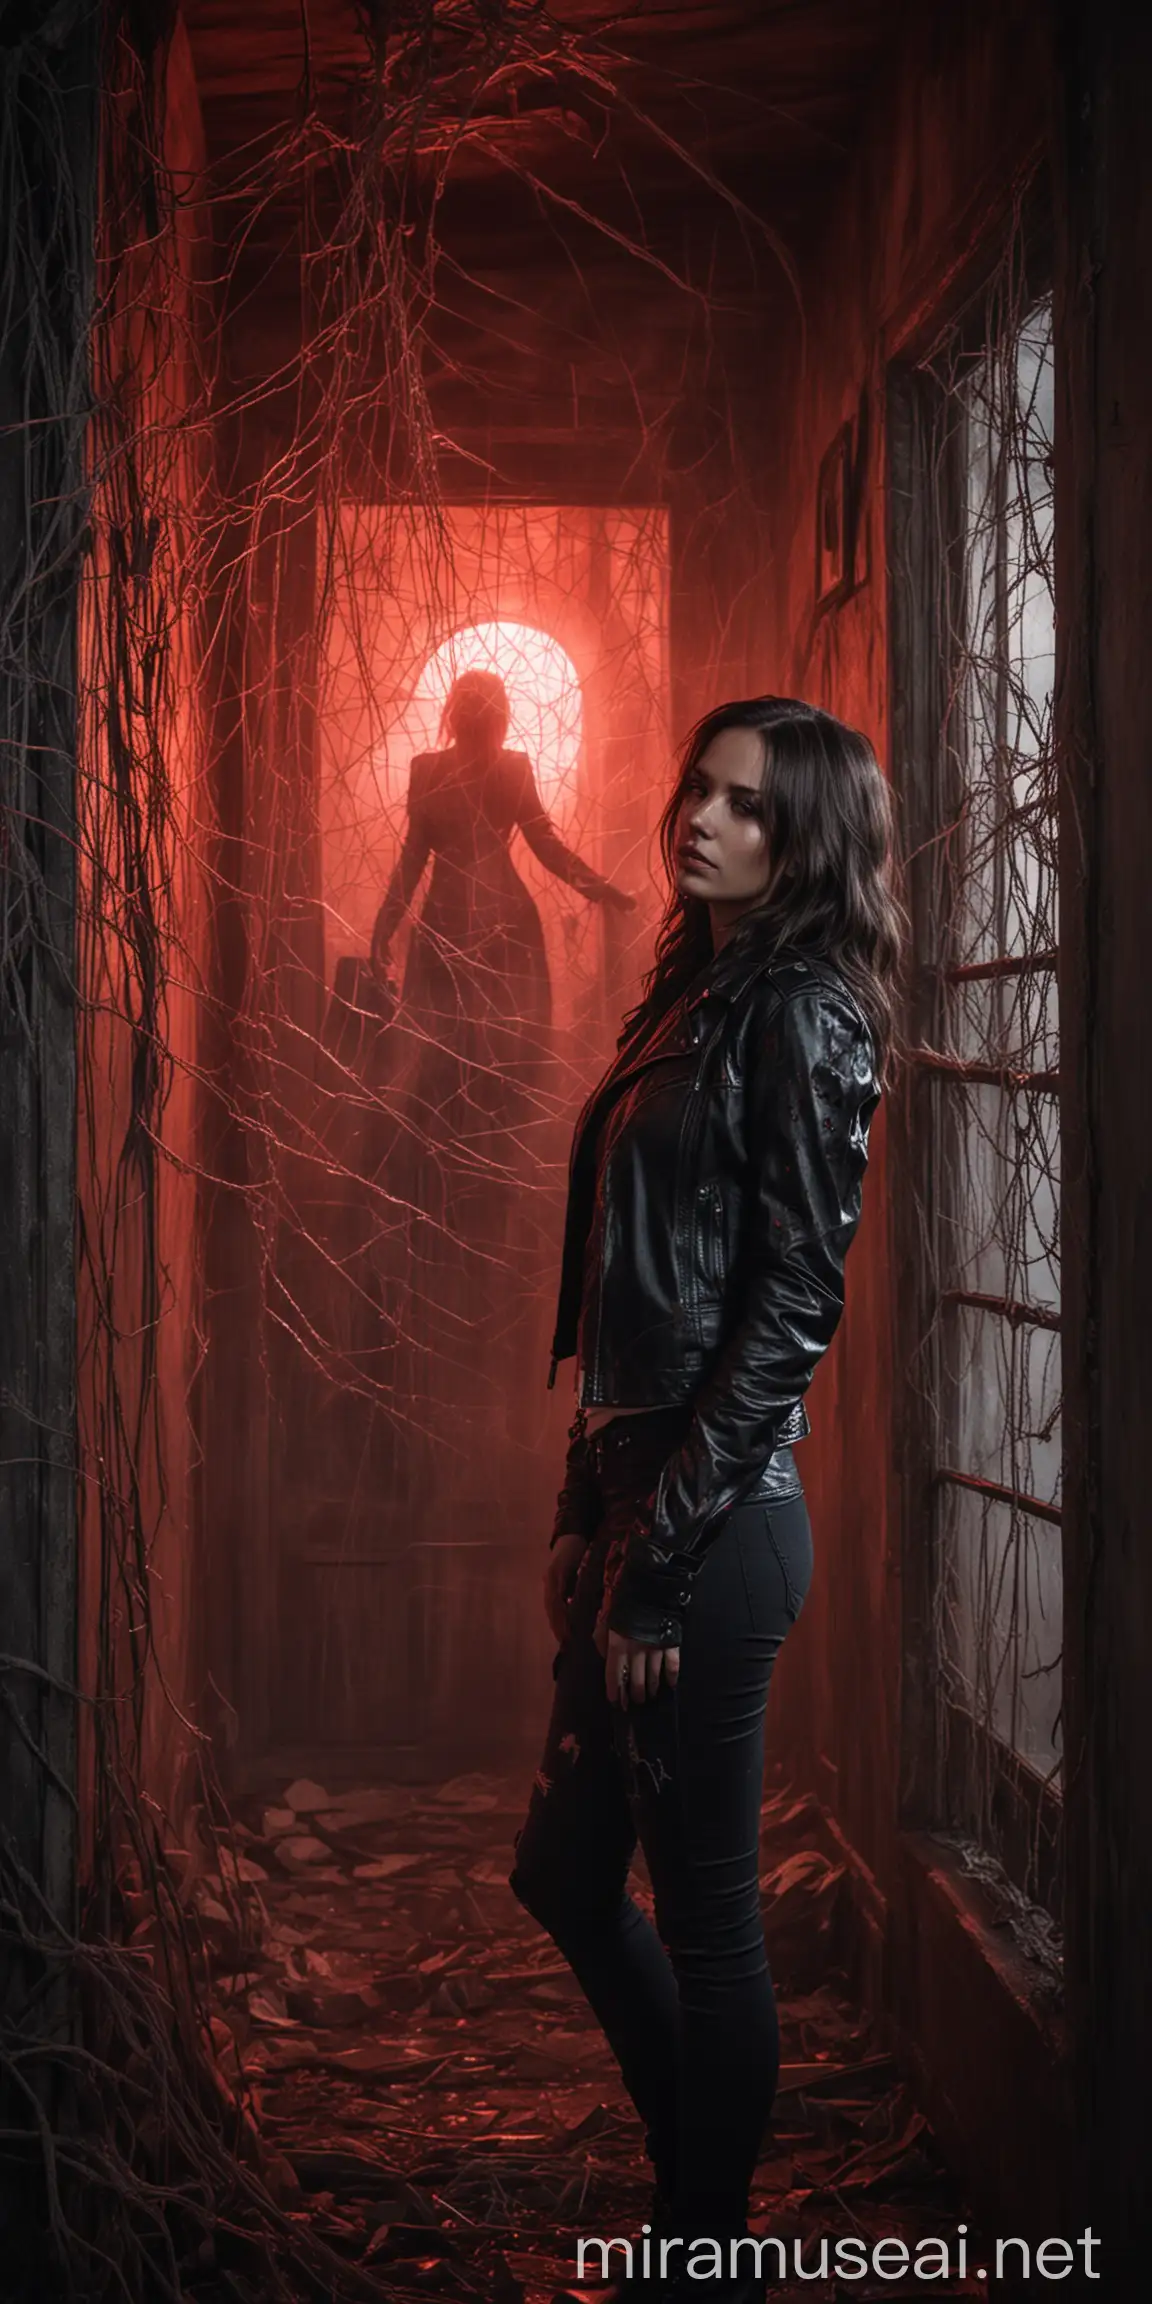 Mysterious Woman in Leather Jacket at Haunted House